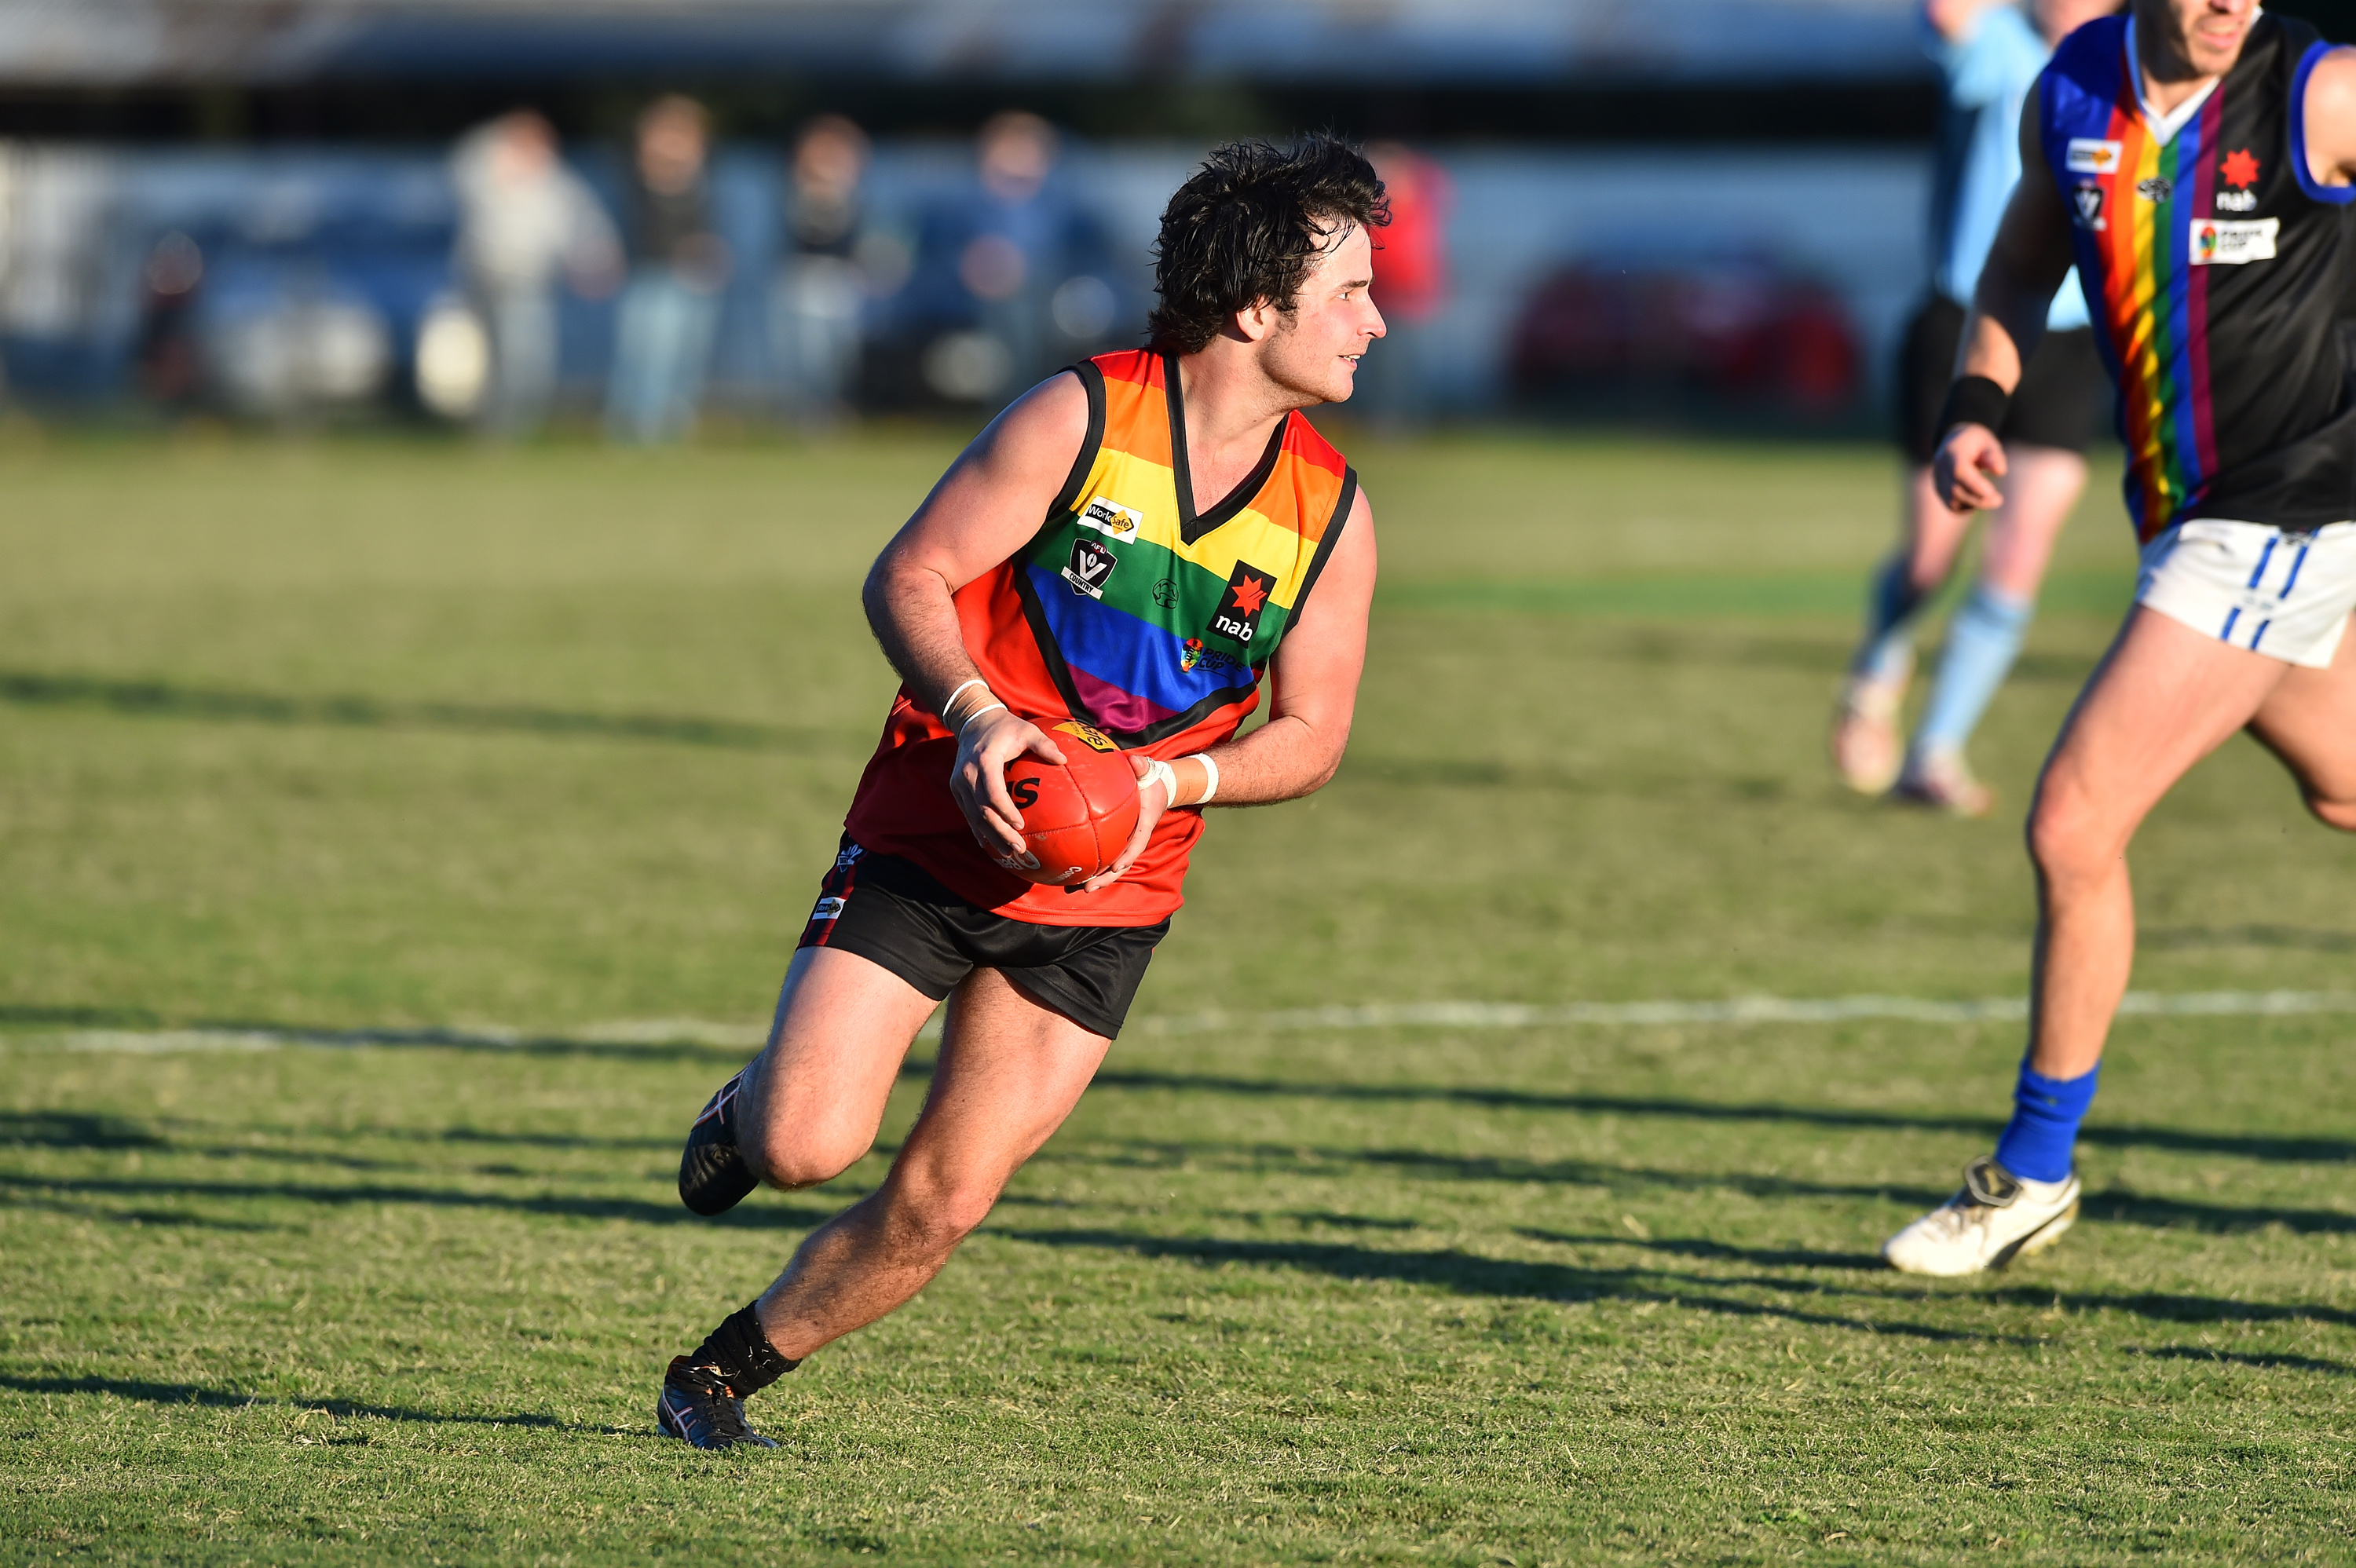 Annual Aussie rules Pride Cup to champion LGBTI inclusion and diversity in sport